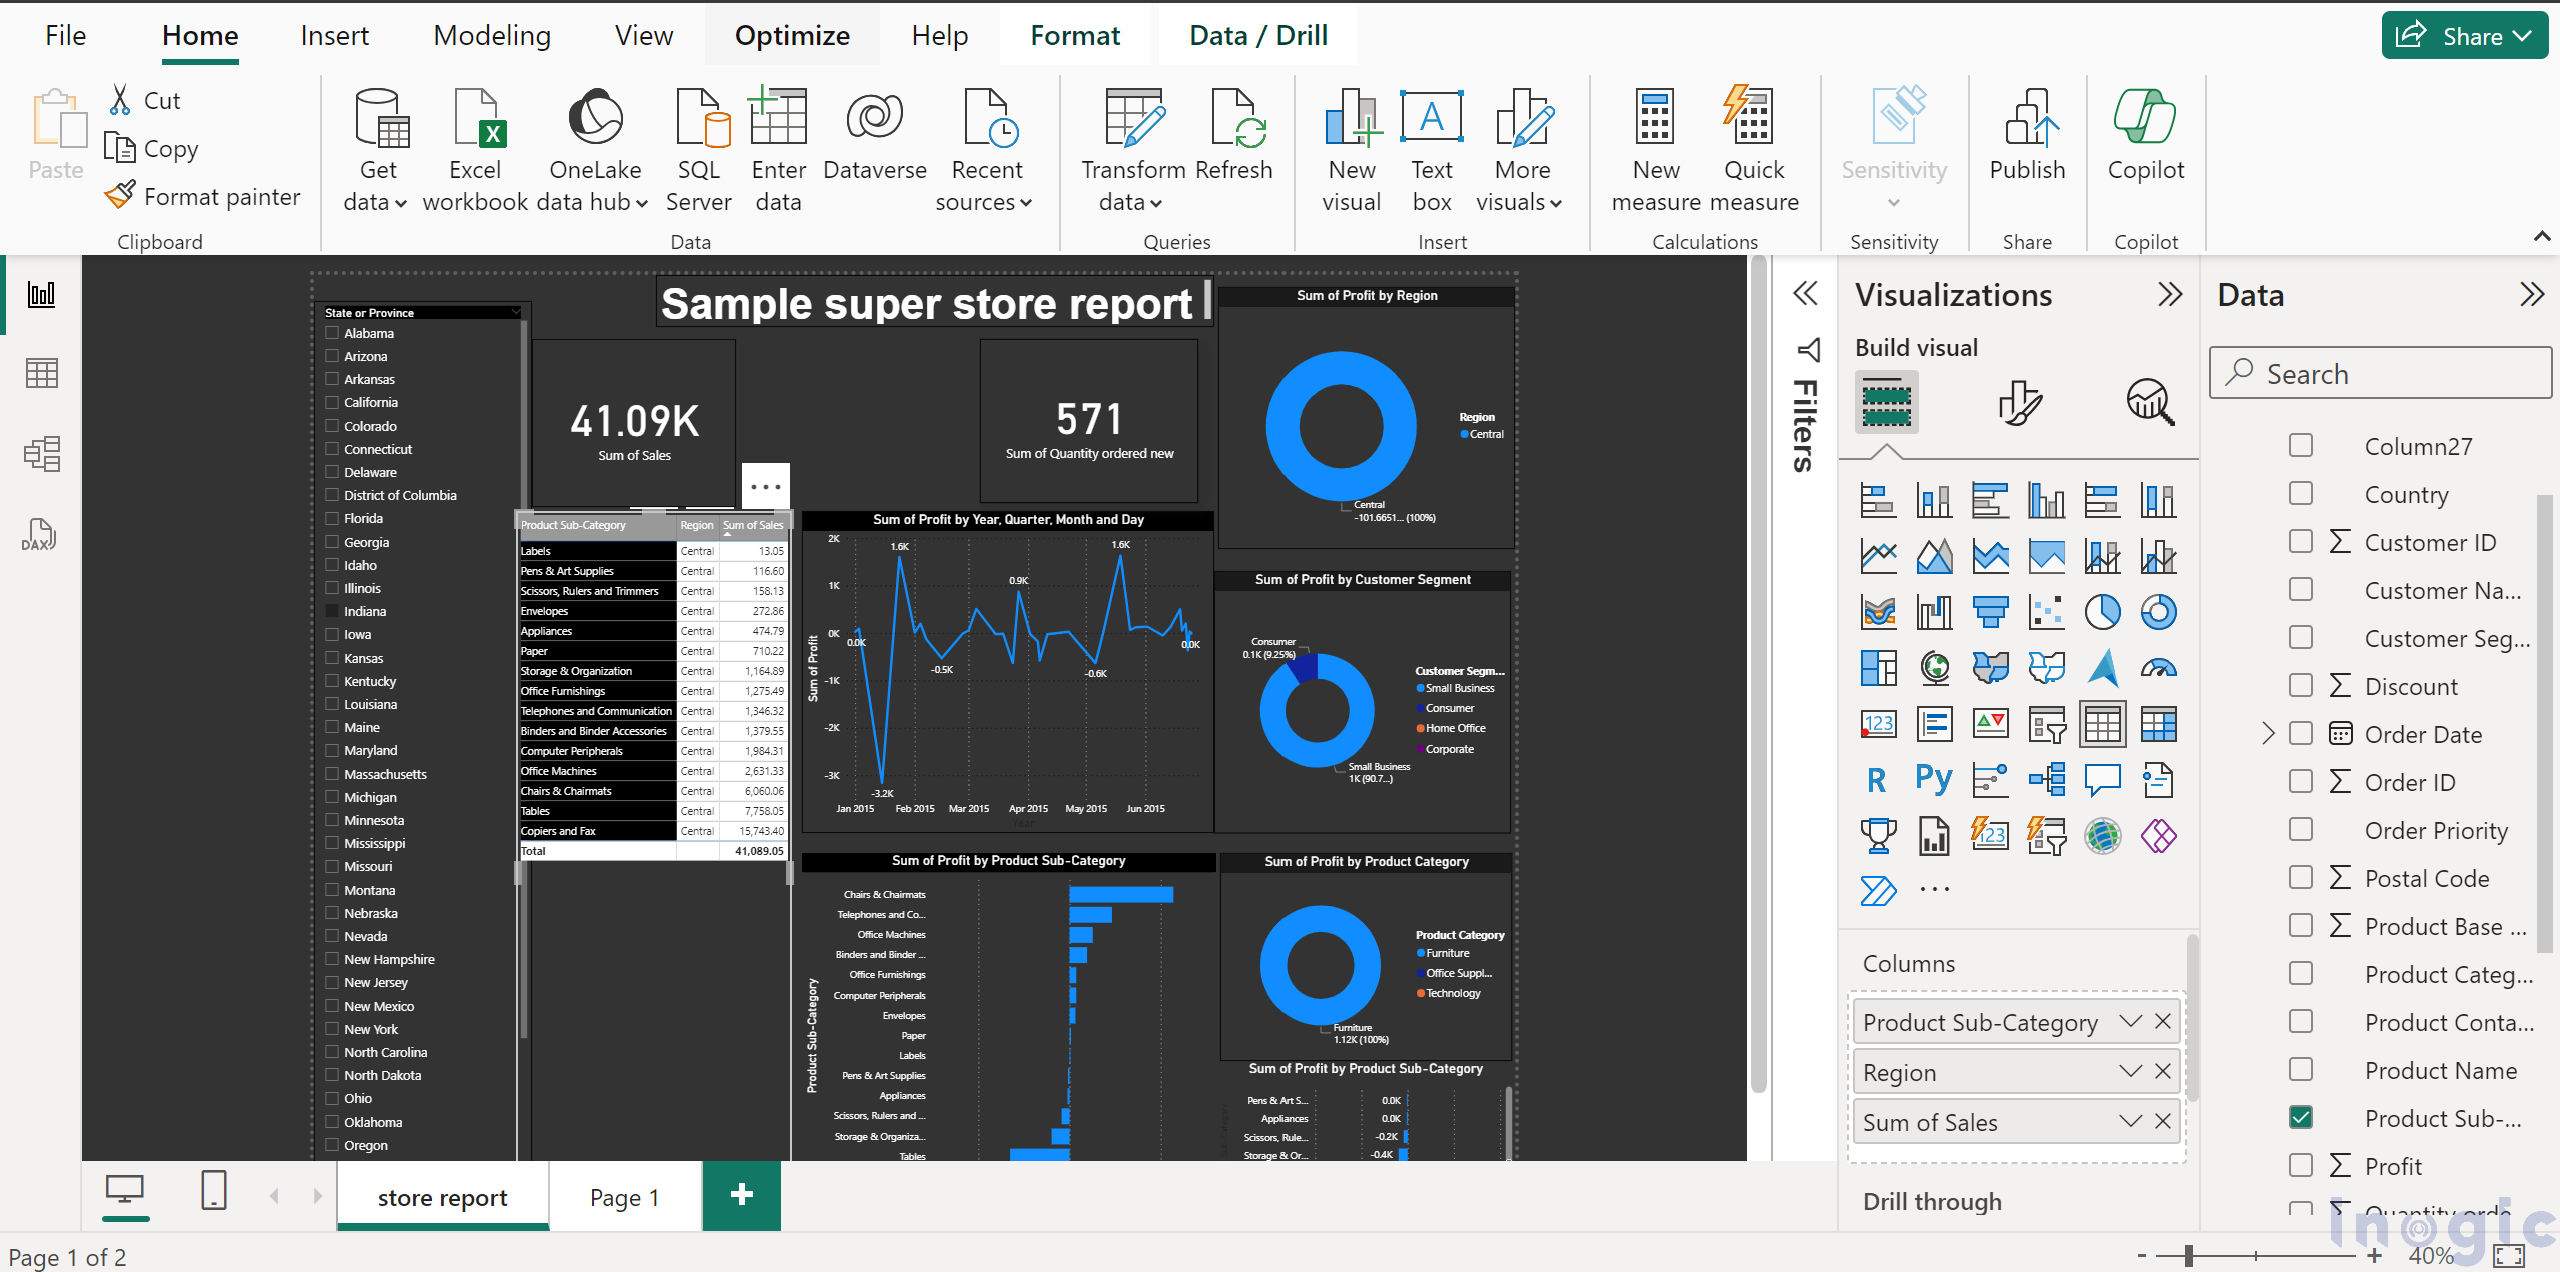 Design Mobile and Browser Layout view within Power BI 